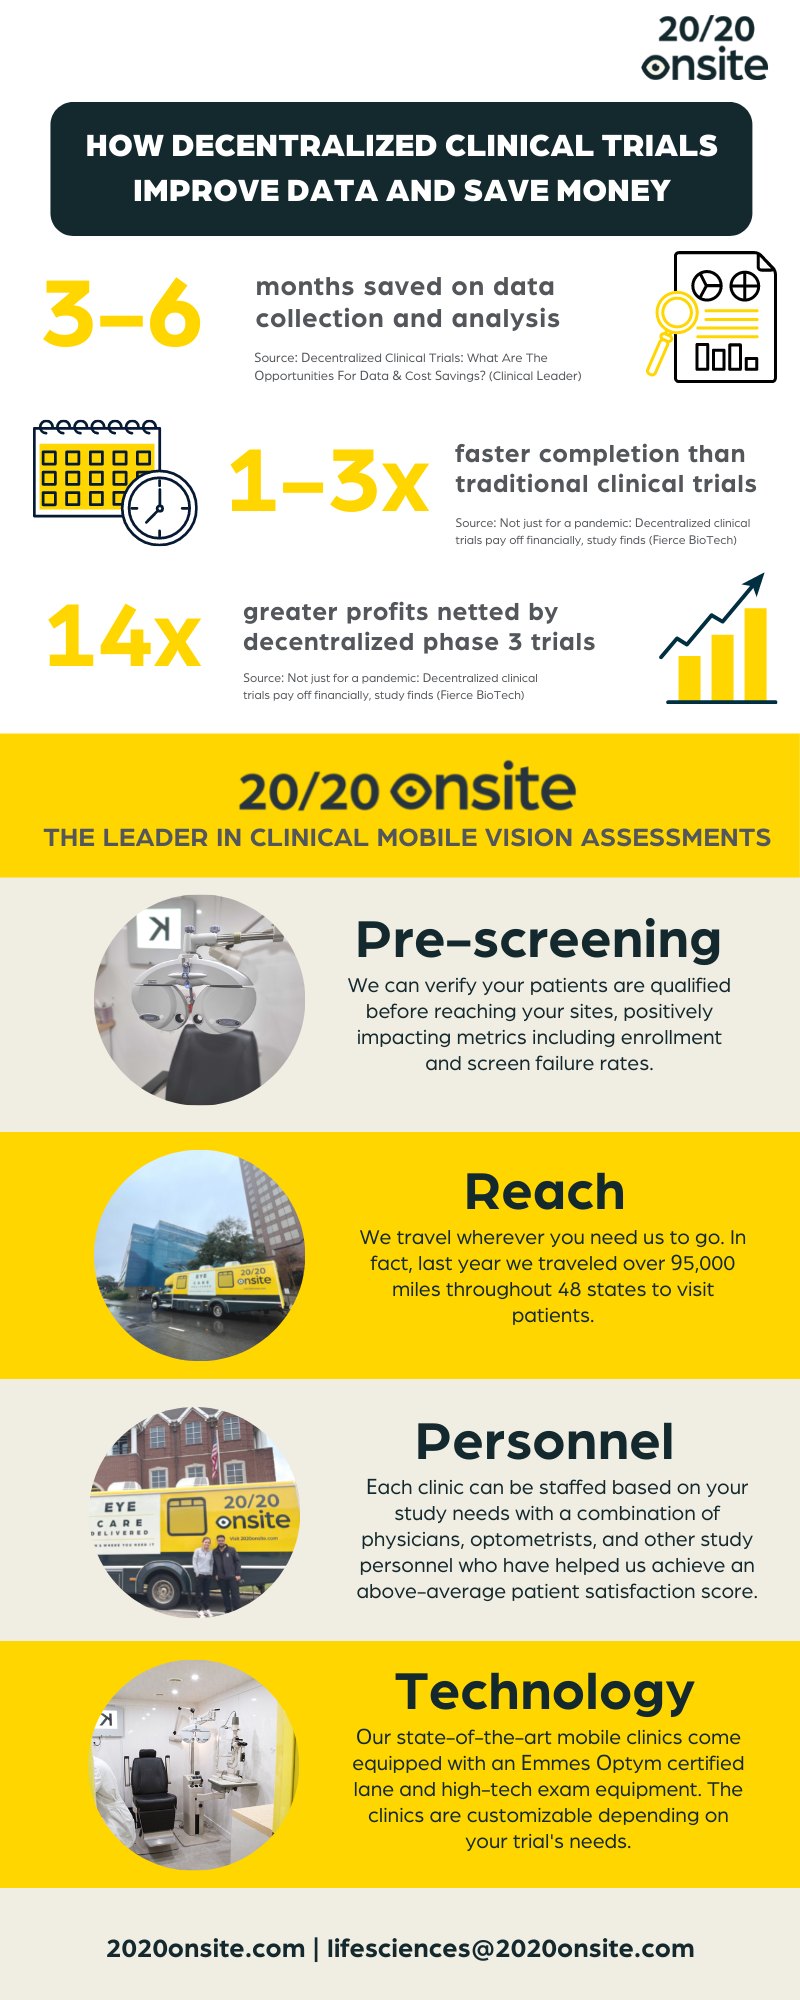 2020 On-site Infographic - Benefits of Decentralized Clinical Trials